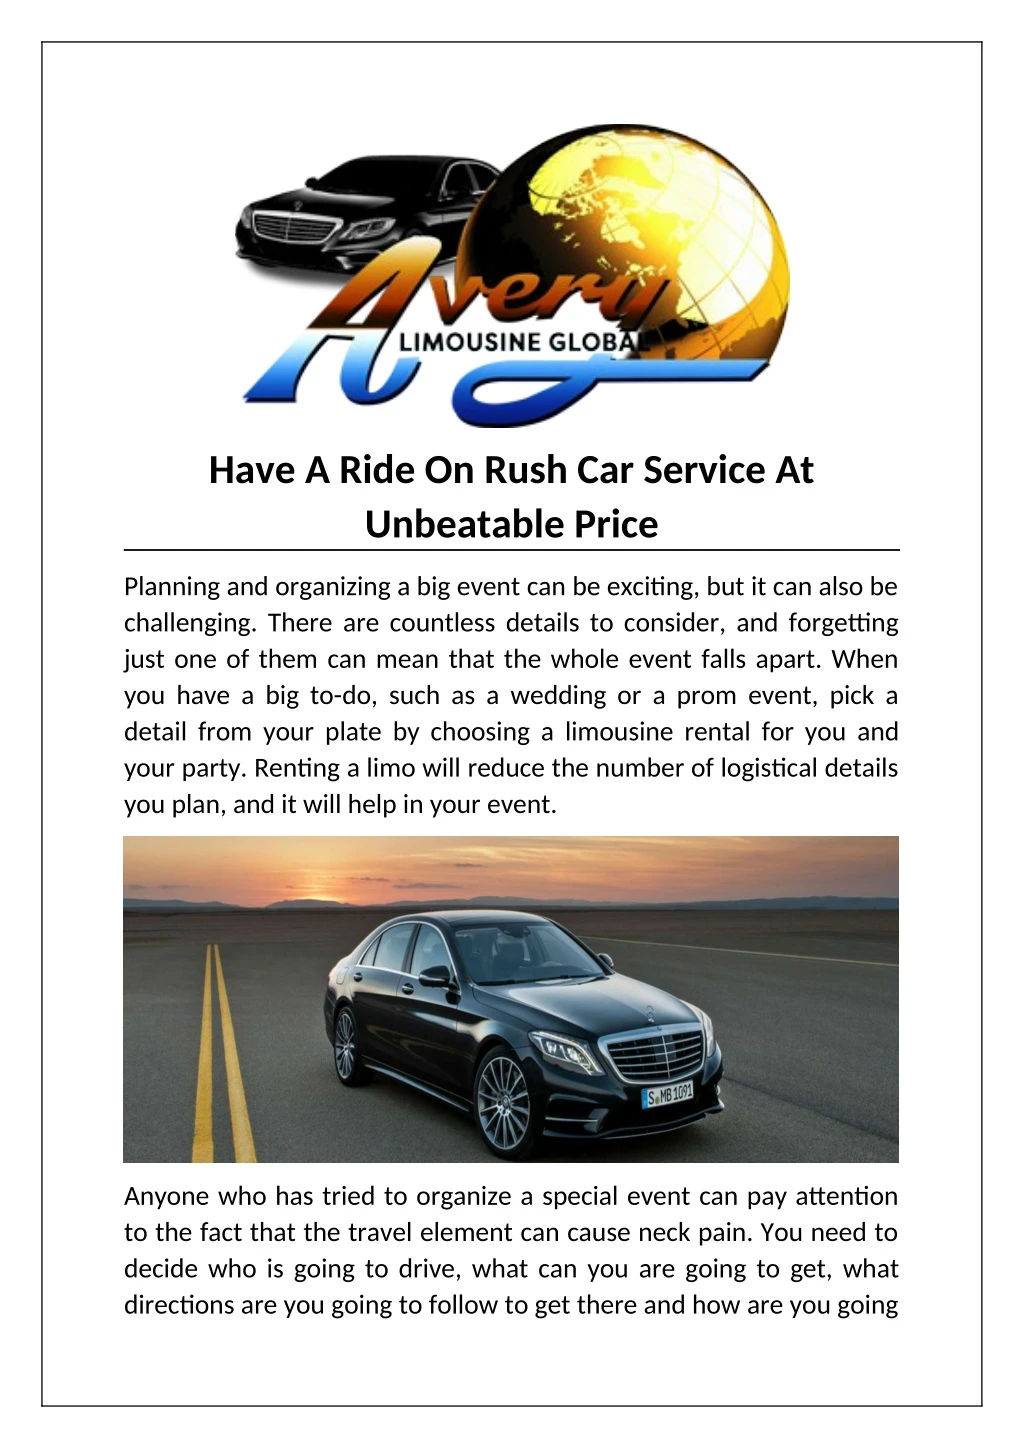 have a ride on rush car service at unbeatable